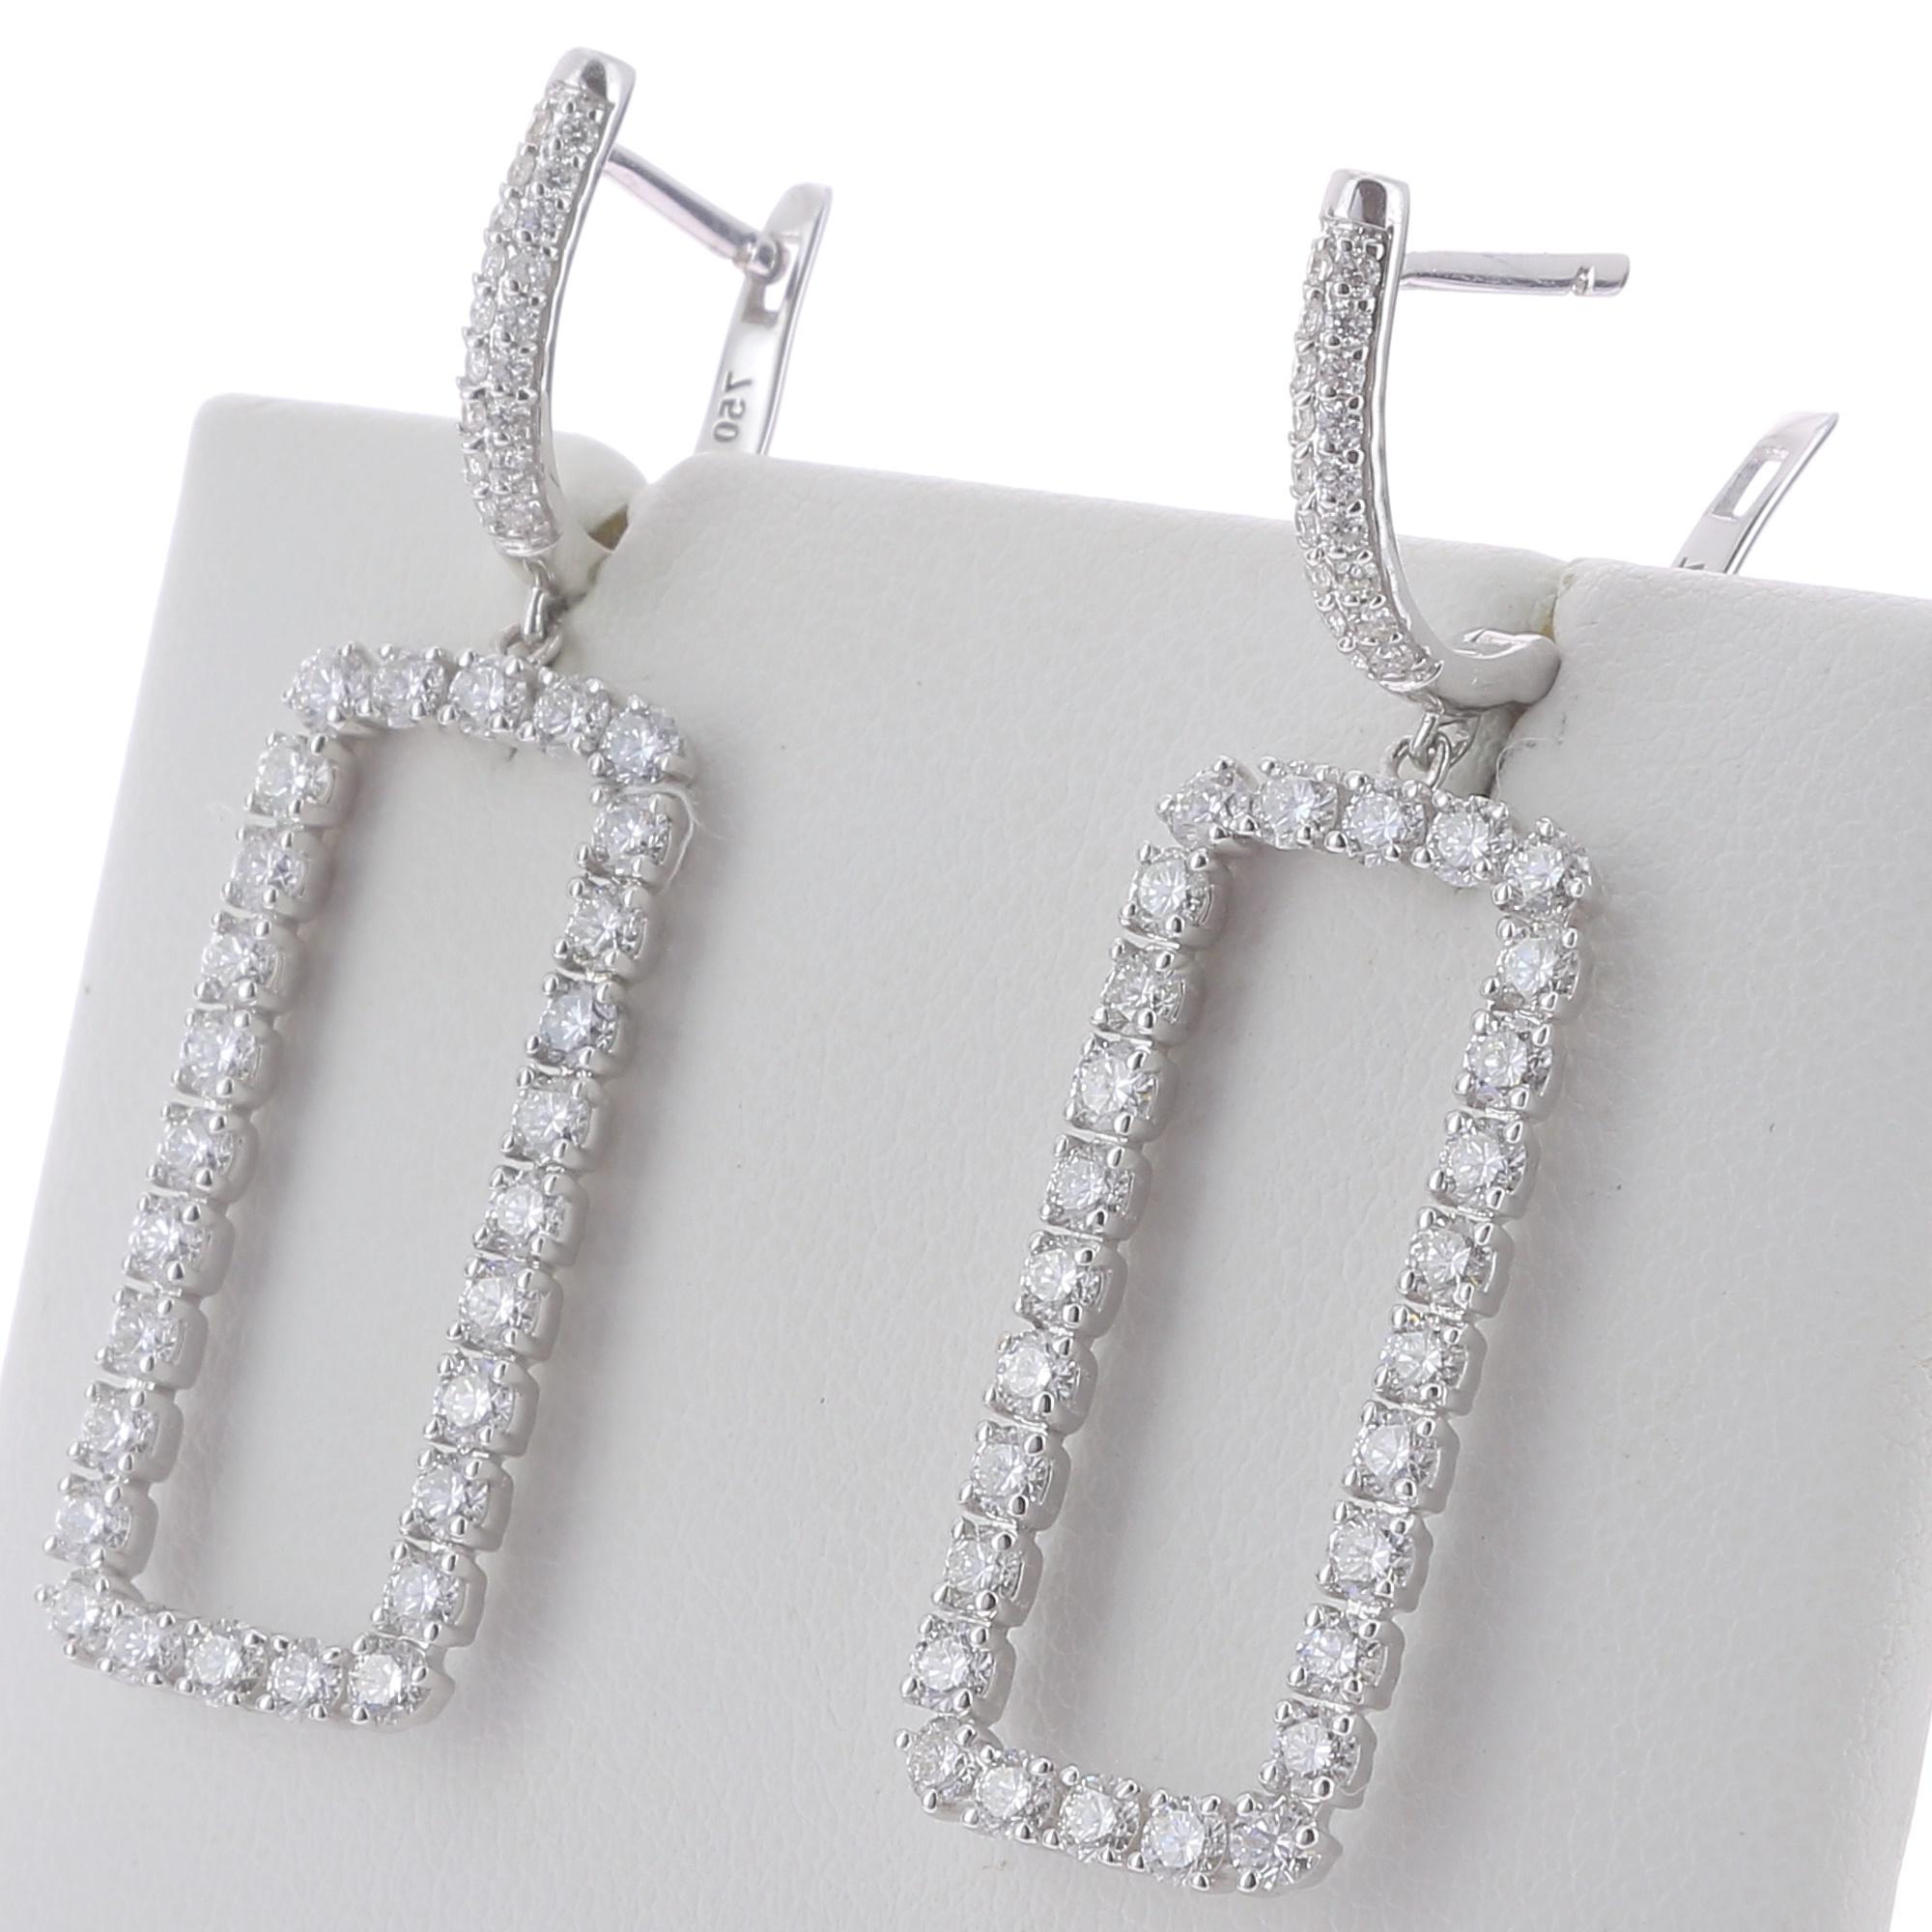 The Rectangle Diamonds Earrings are set with Round Diamonds weighing 2.63 Carat.
The Earrings are set with 56 Round Diamonds with a rectangle pattern weighing 2.42 Carats, and a halo of round diamond weighing 0.21 Carat
The Diamonds are GVS